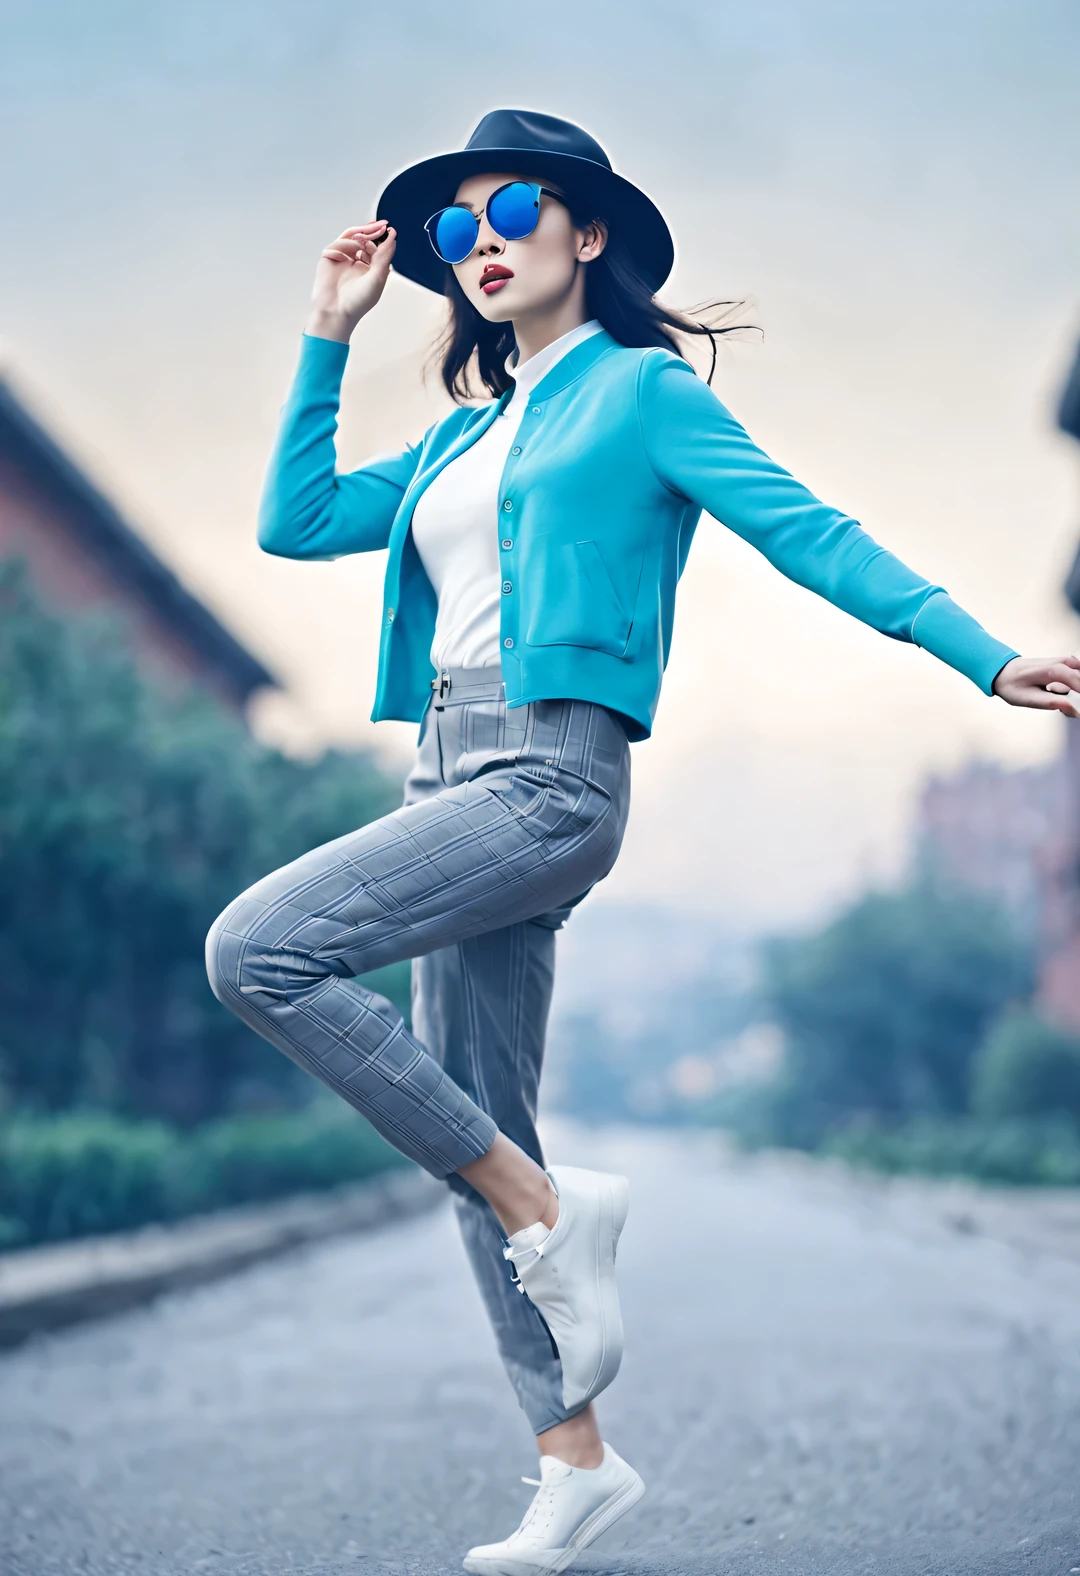 (Modern art dance simple poster design), (Half-length close-up), (Beautiful Chinese girl dancing in the air), (Wearing sunglasses and a hat: 1.2), Characterized by exquisite details and layering, The pastel tones of a light blue coat and off-white floral sweater blend together, And the sharp contrast of black and white plaid pants, Create an elegant and modern urban style. (Briefcase flight: 0.85), Wear modern and stylish winter fashion, slim waist, high nose bridge, Head up posture, sad yet beautiful, slender figure, Exquisite facial features, correct finger,
swirling fog illustration, ink painting, black hair, Princess curly long hair, Proud, Surrealism, contemporary art photography, action painting illustration, abstract expressionism, Pixar, depth of field, motion blur, backlight, Fall out, decline, Elevation viewing angle, Sony FE General Manager, ultra high definition, masterpiece, Accuracy, textured skin, Super details, high detail, high quality, Award-winning, best quality, Level, 16k, Shot from a bottom-up perspective,